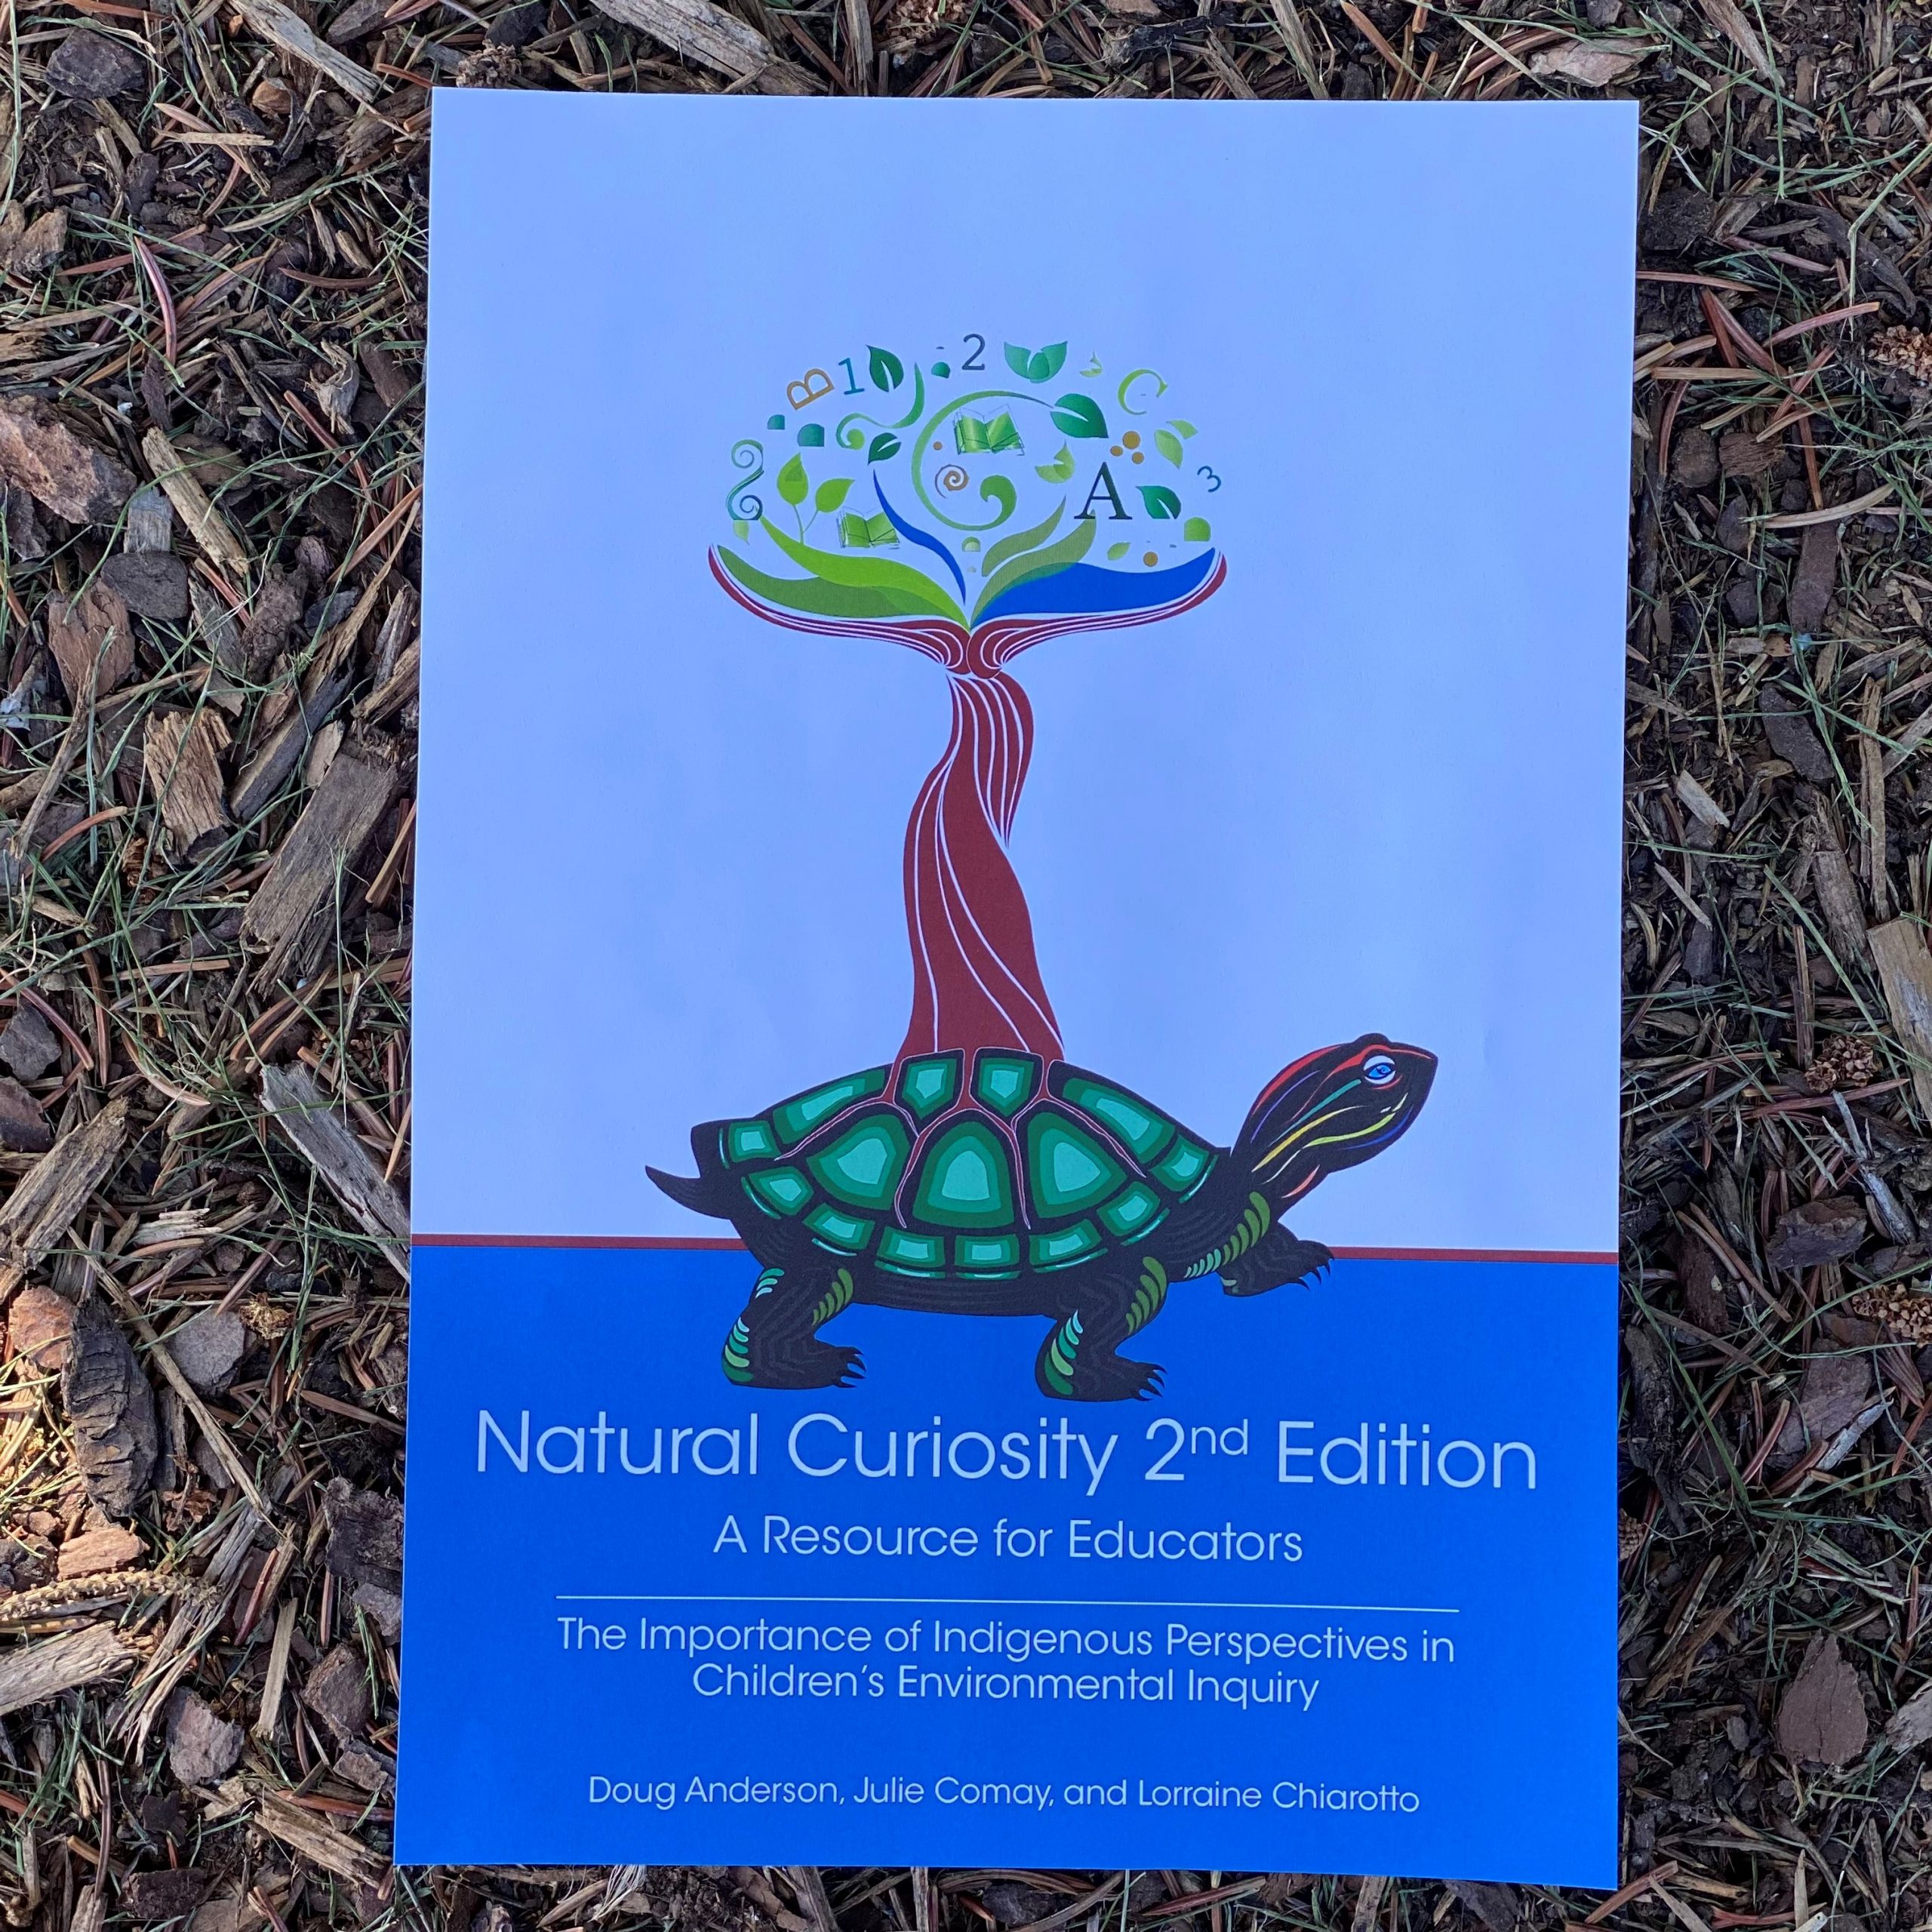 Natural Curiosity, 2nd Edition